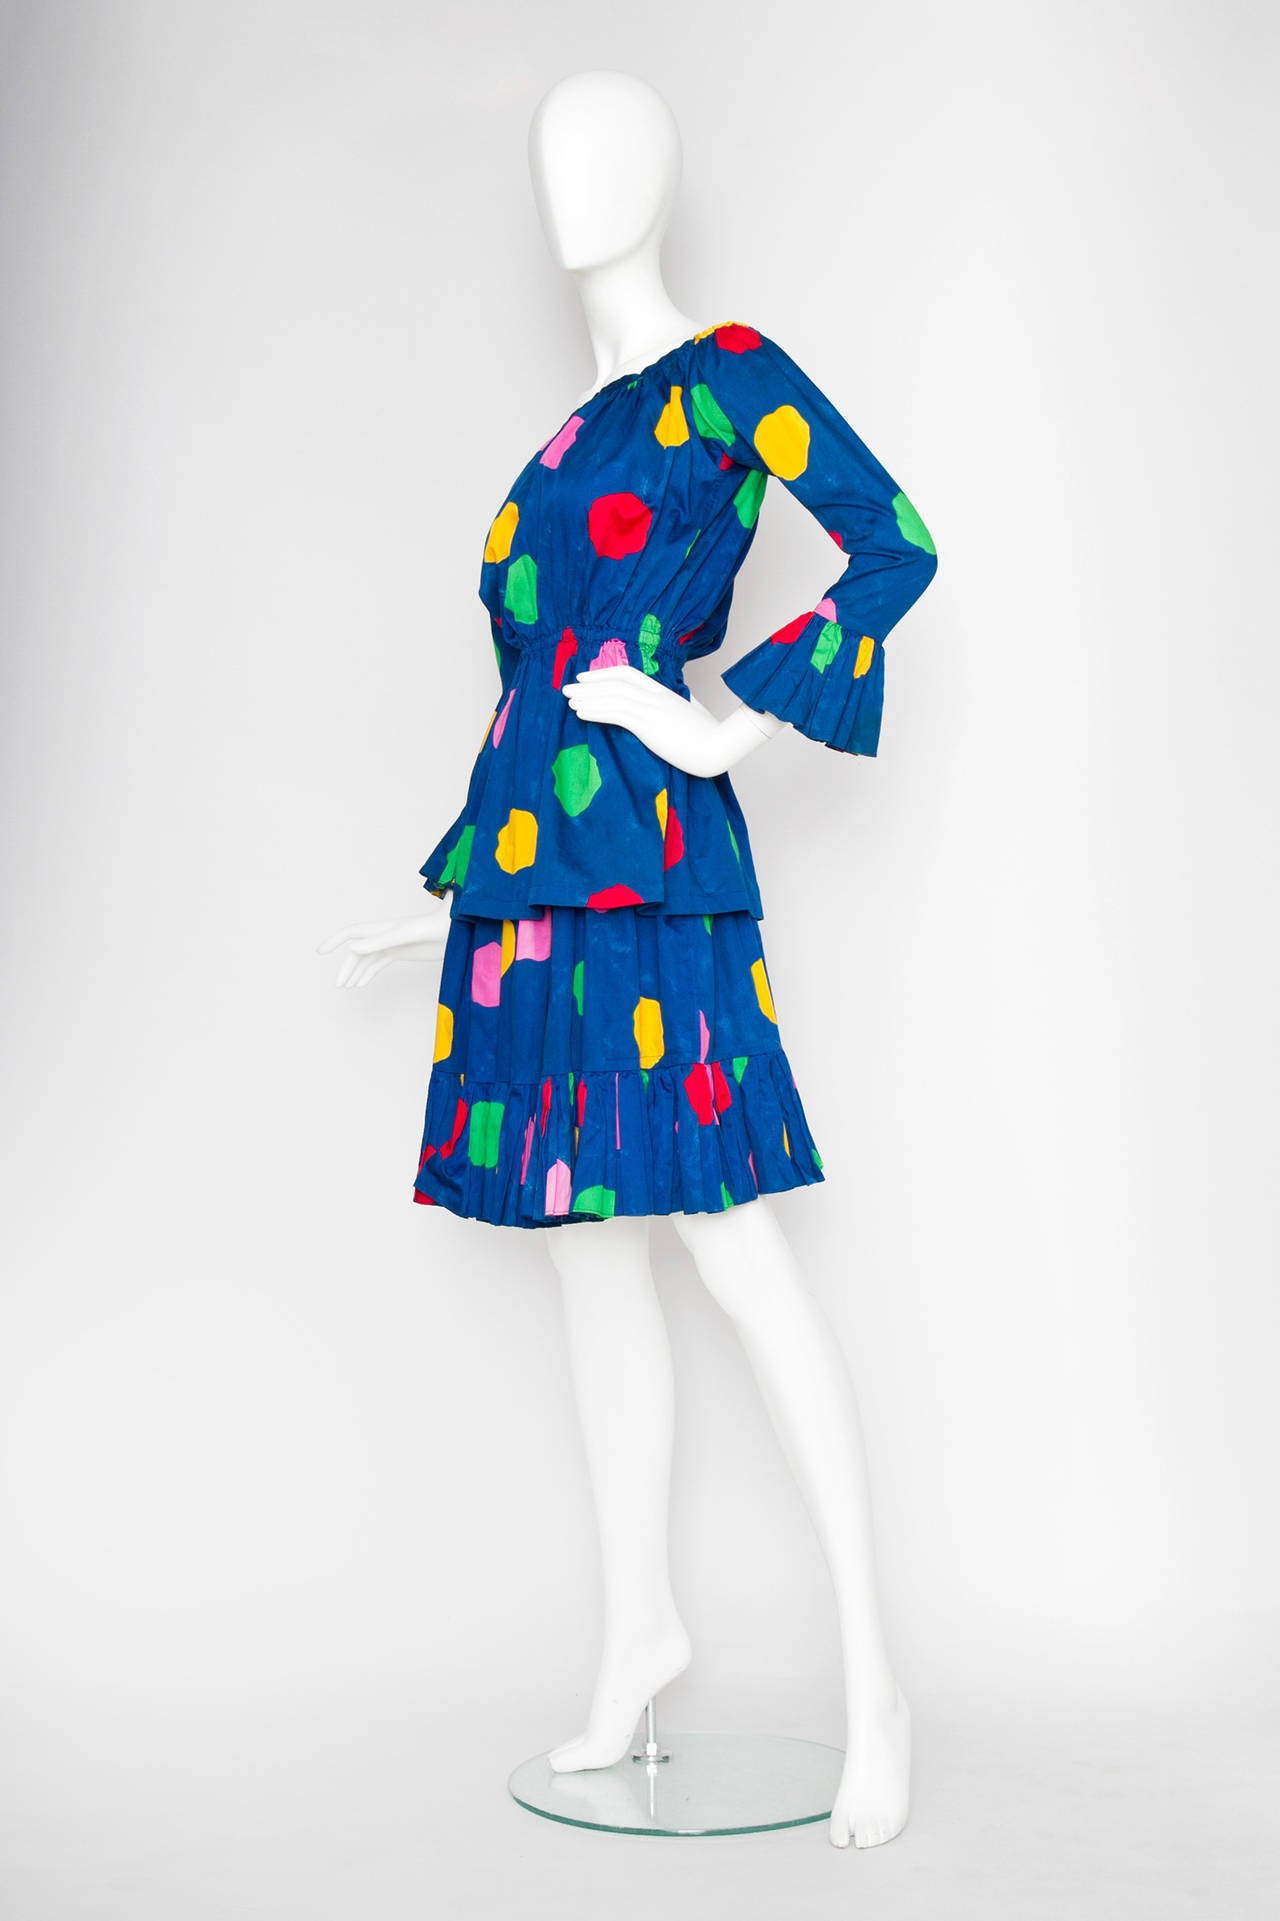 A 1980s bright blue Yves Saint Laurent peasant skirt dress with festive multicolored polka-dot print. A separate off-shoulder blouse with an elasticated waist, bell sleeves and a knee-length skirt with an elasticated waistband around the hip.

The